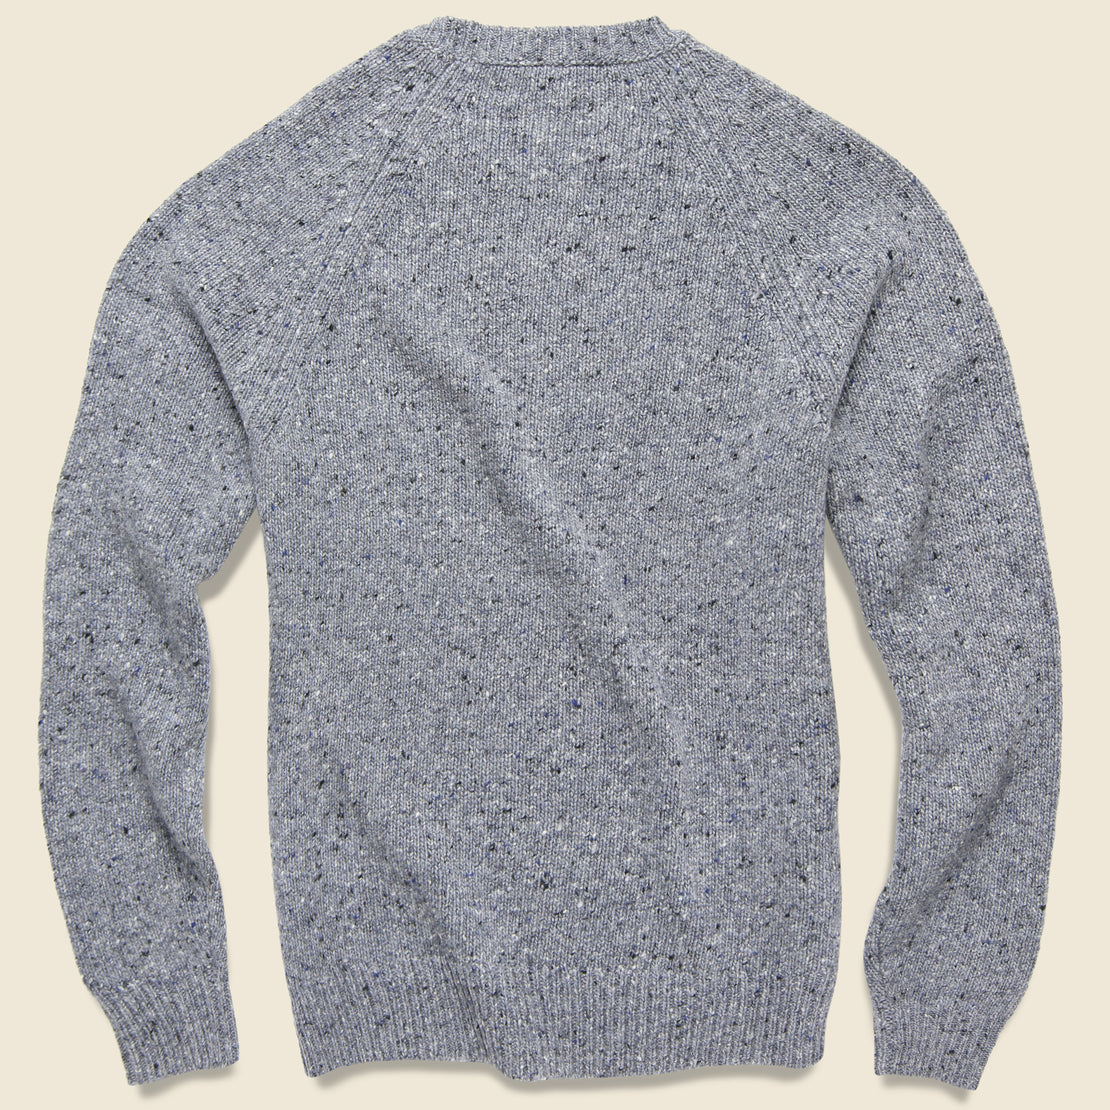 Alpaca Wool Donegal Crew Sweater - Stone Flag Grey - Alex Mill - STAG Provisions - Tops - Sweater